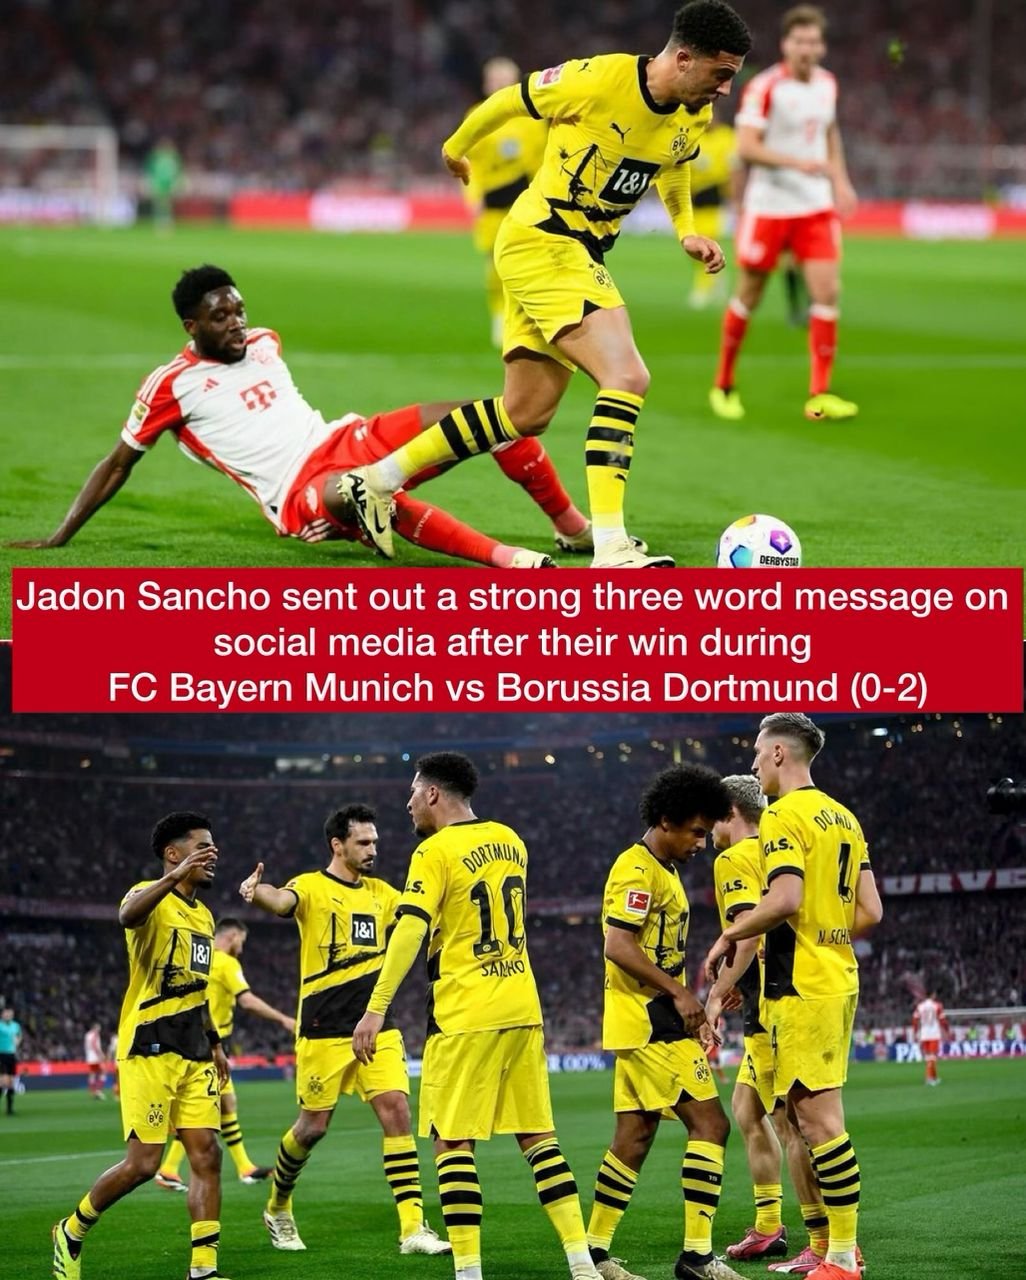 Manchester United loanee Jadon Sancho break silence and sent out a strong message on social media after their win during FC Bayern Munich vs Borussia Dortmund